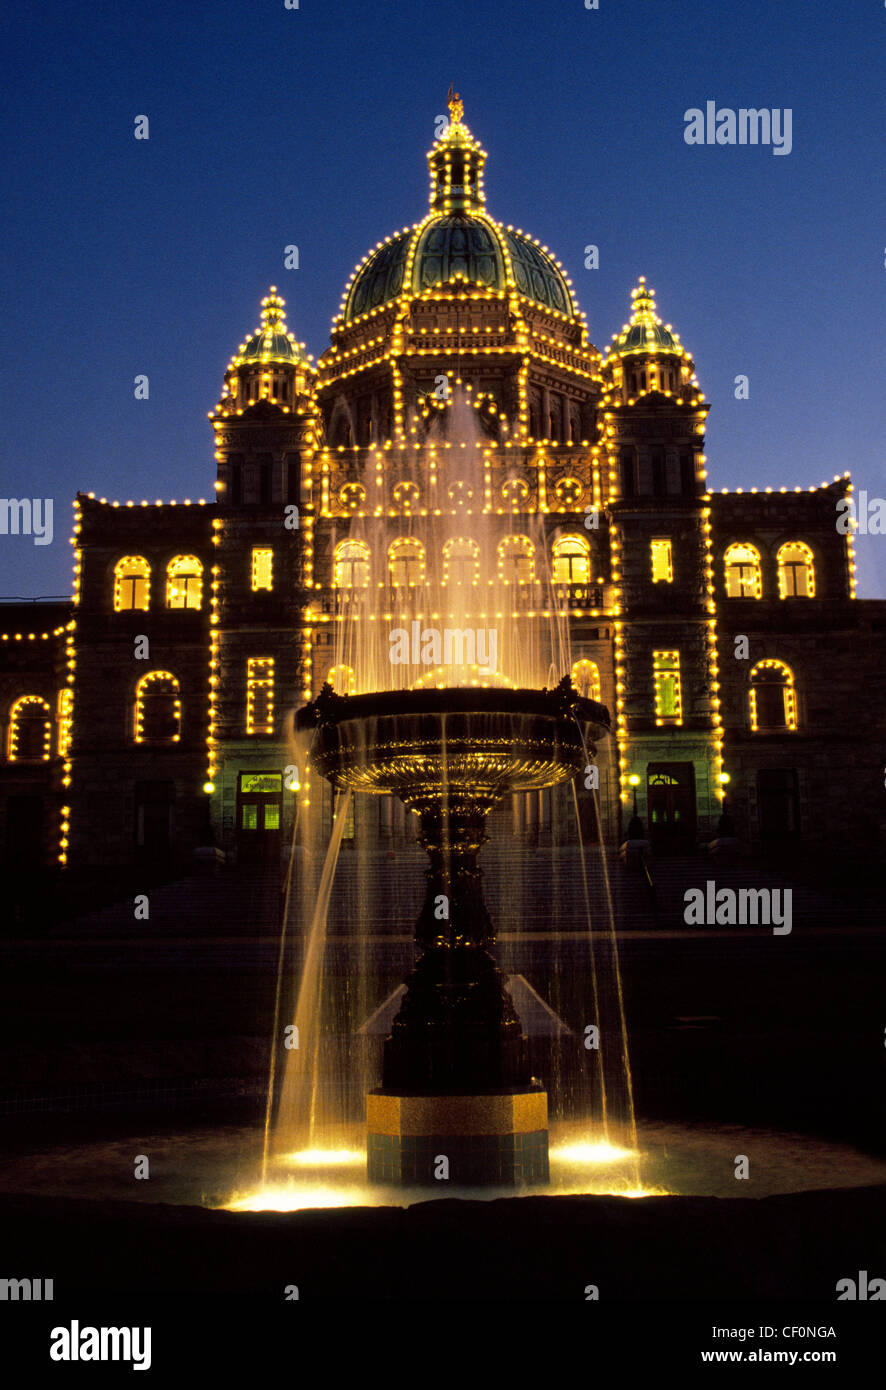 Lights at night illuminate the ornate 1890s Parliament Buildings on Vancouver Island in Victoria, the capital city of British Columbia, Canada. Stock Photo